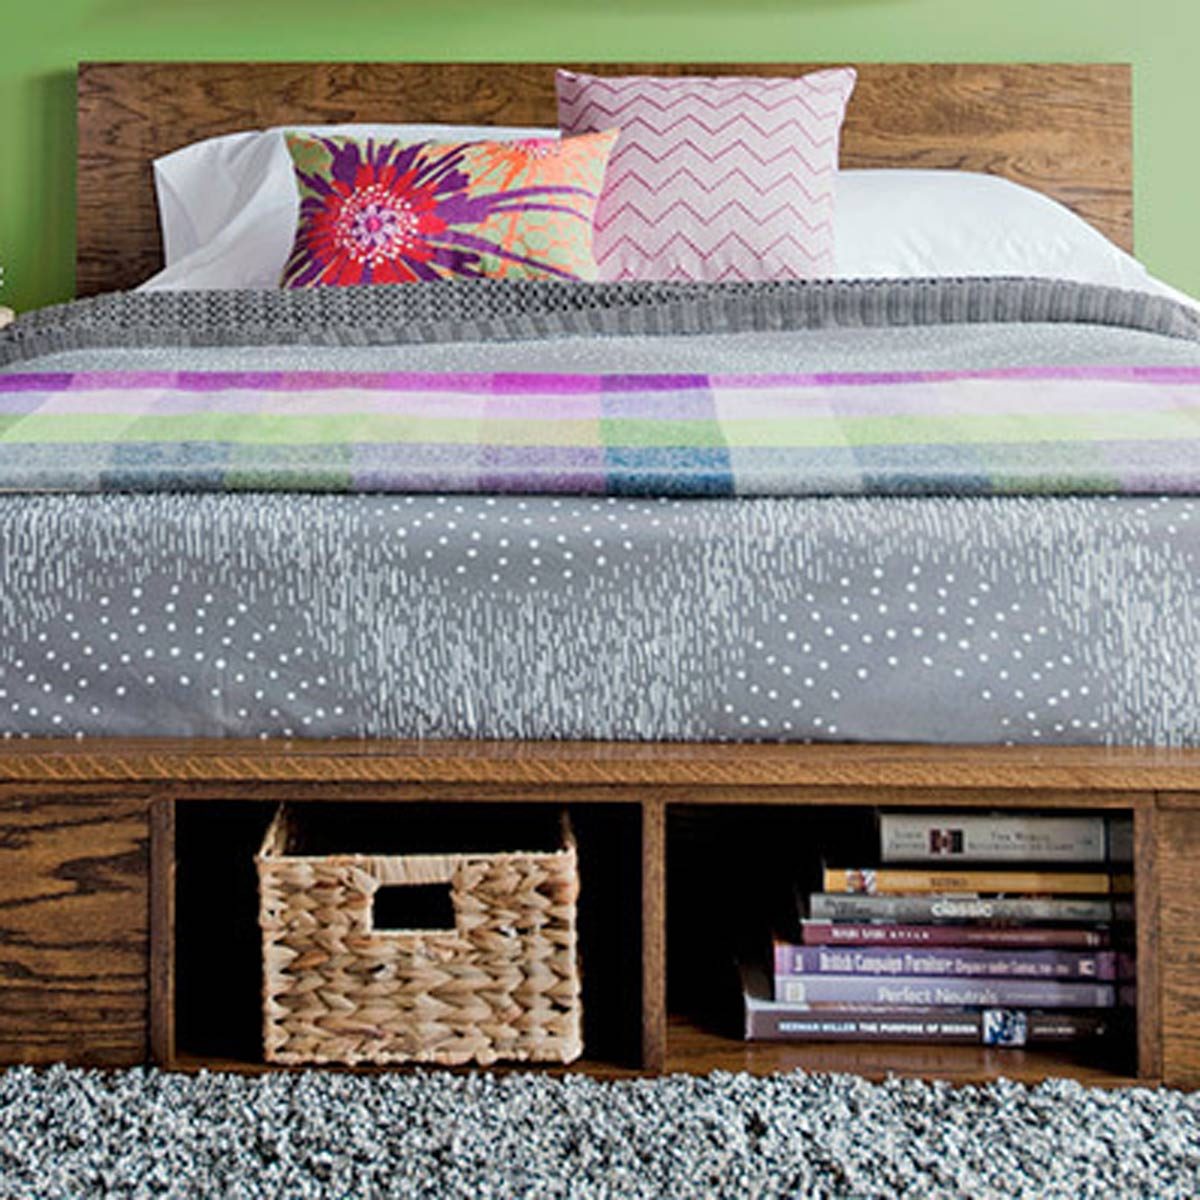 10 Awesome Diy Platform Bed Designs The Family Handyman